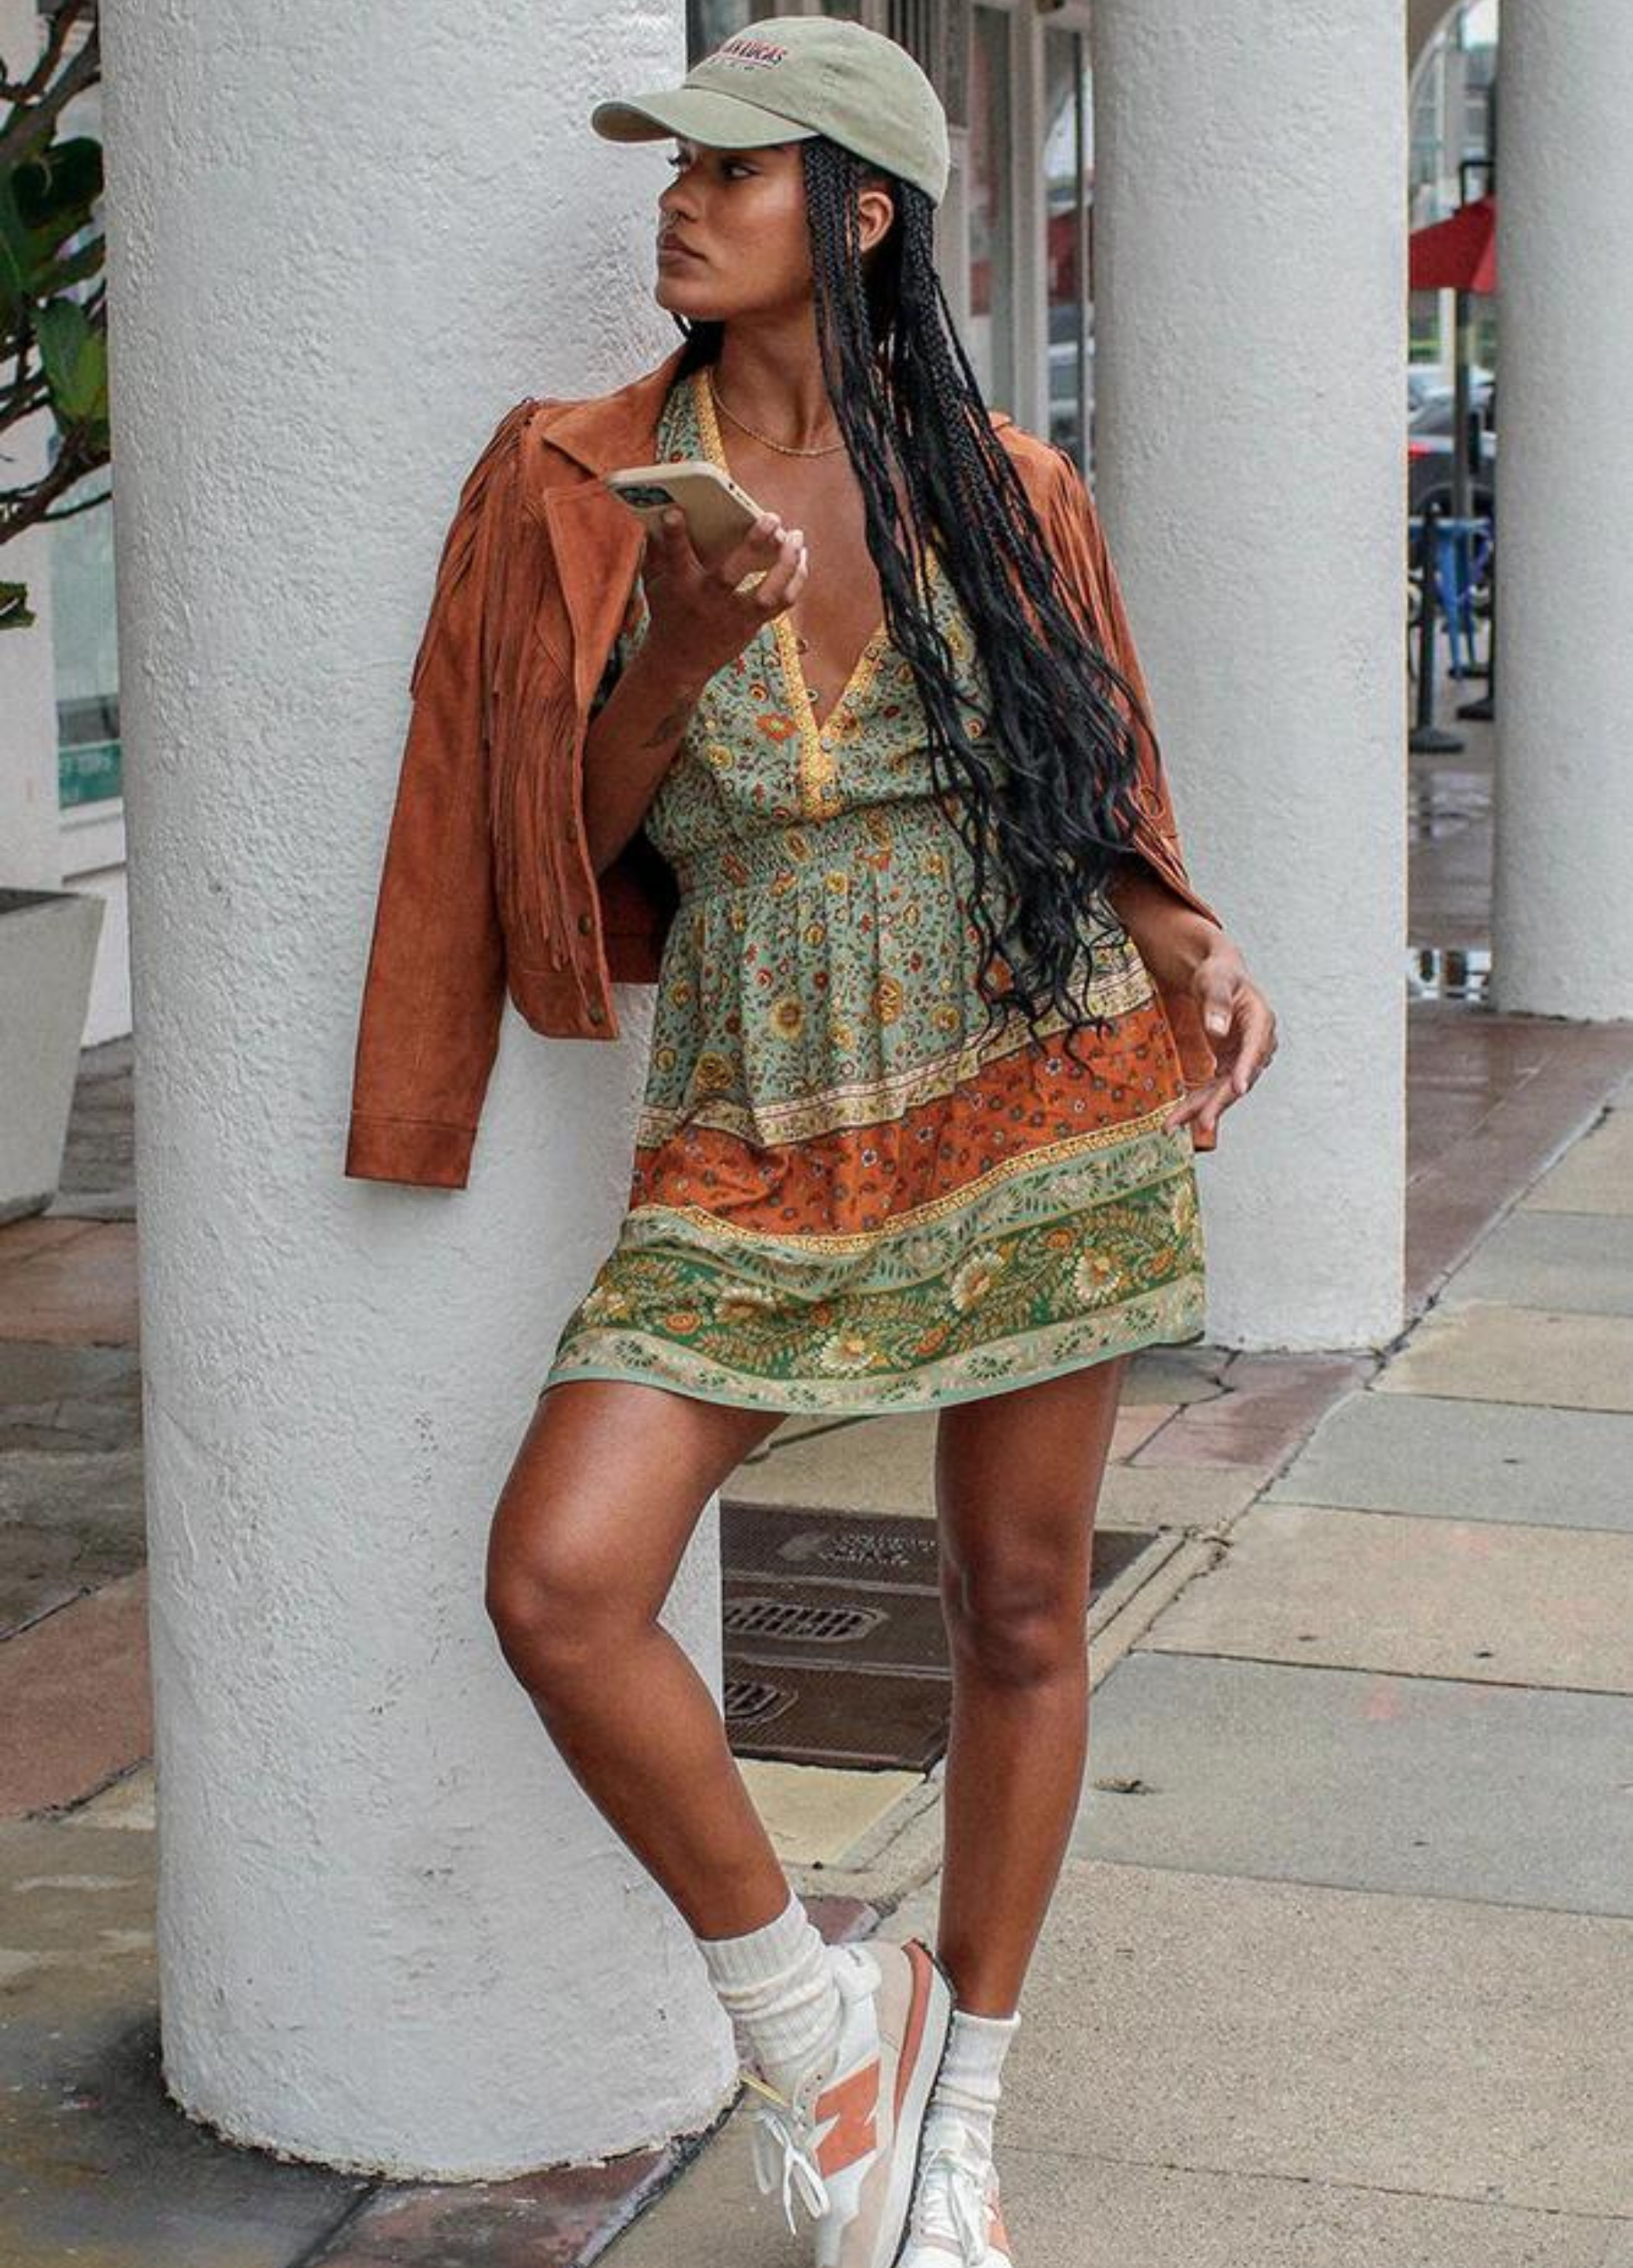 Lady untamed playdress with brown jacket and trainers